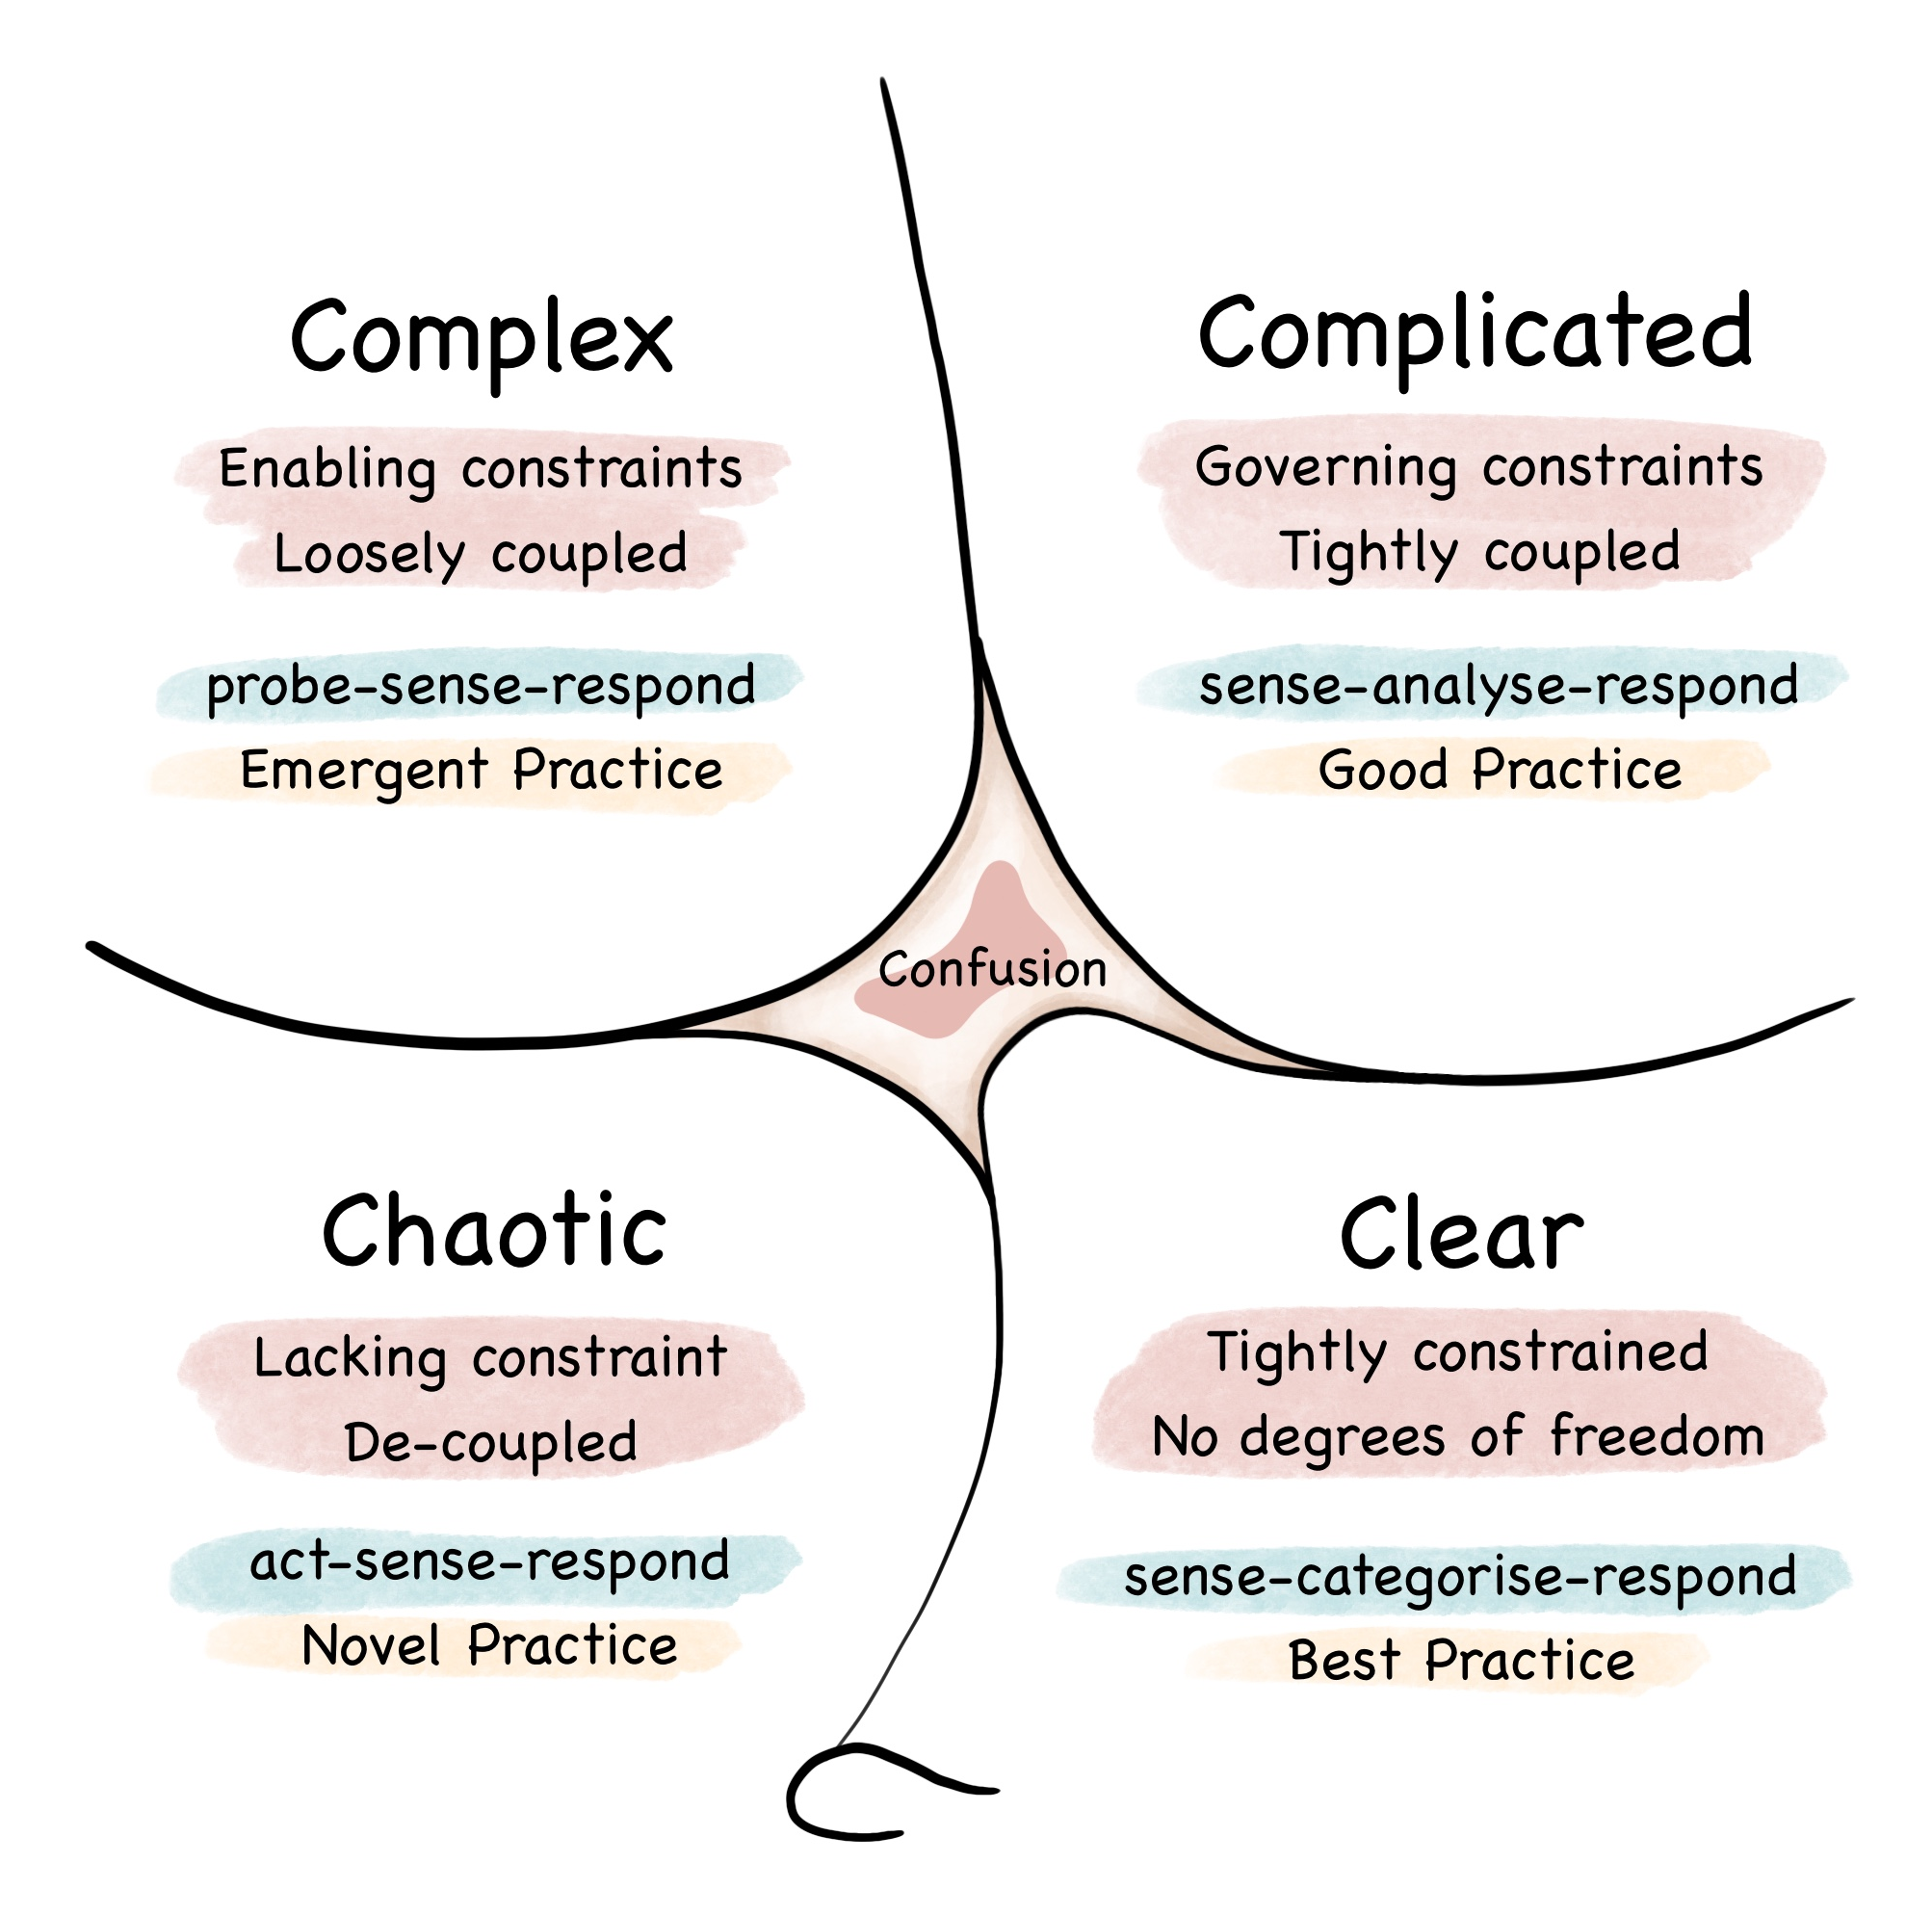 This terminology comes from the Cynefin Framework.